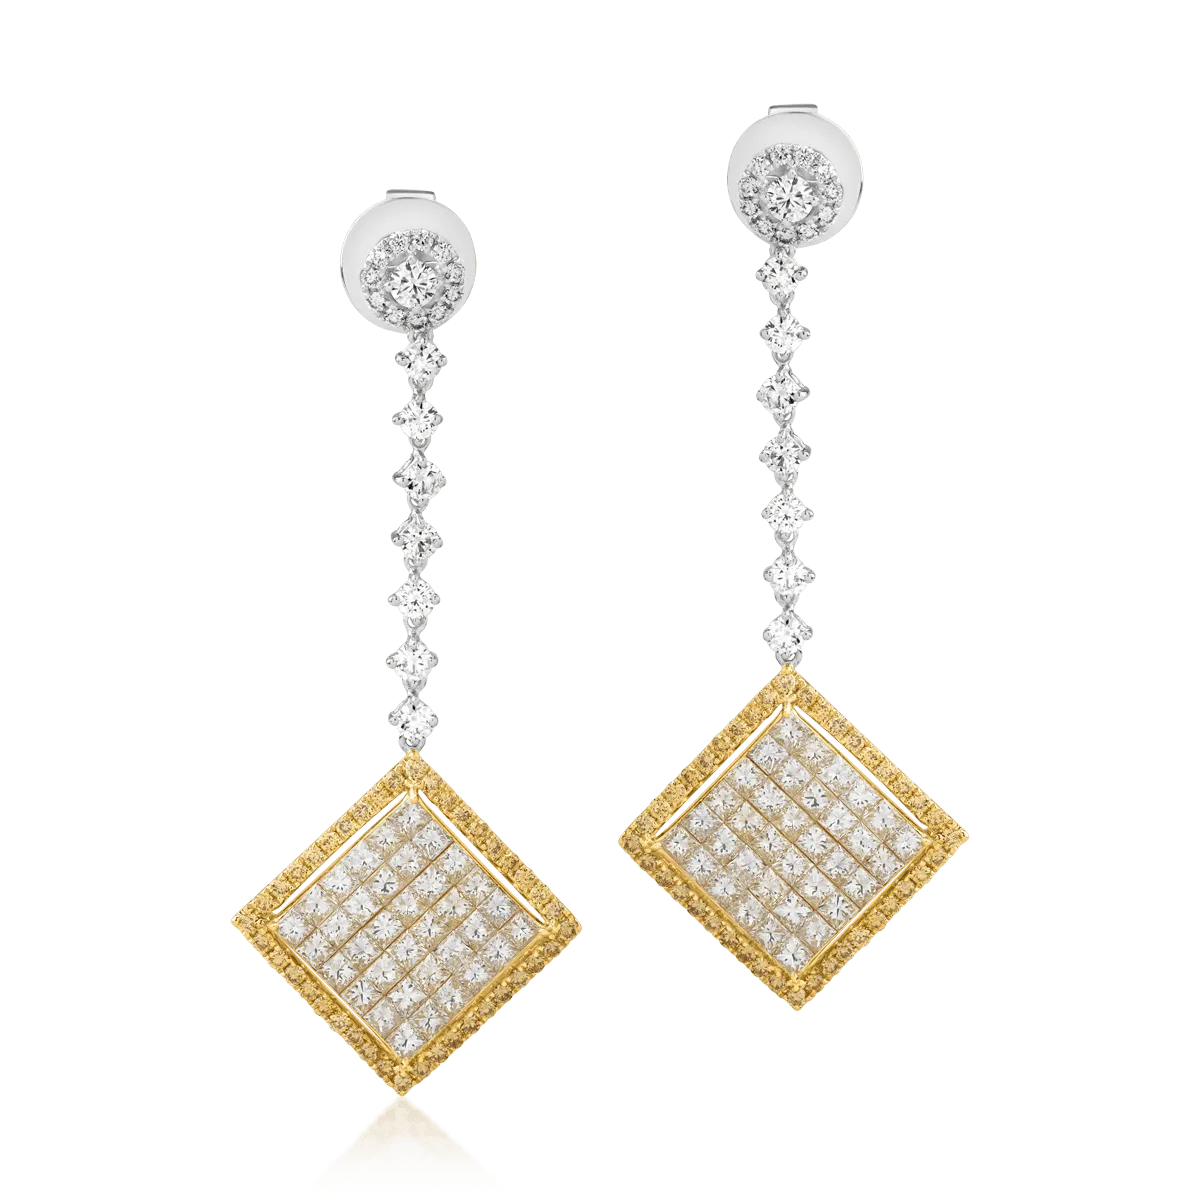 18K white-yellow gold earrings with 3.43ct colored diamonds and 0.95ct clear diamonds